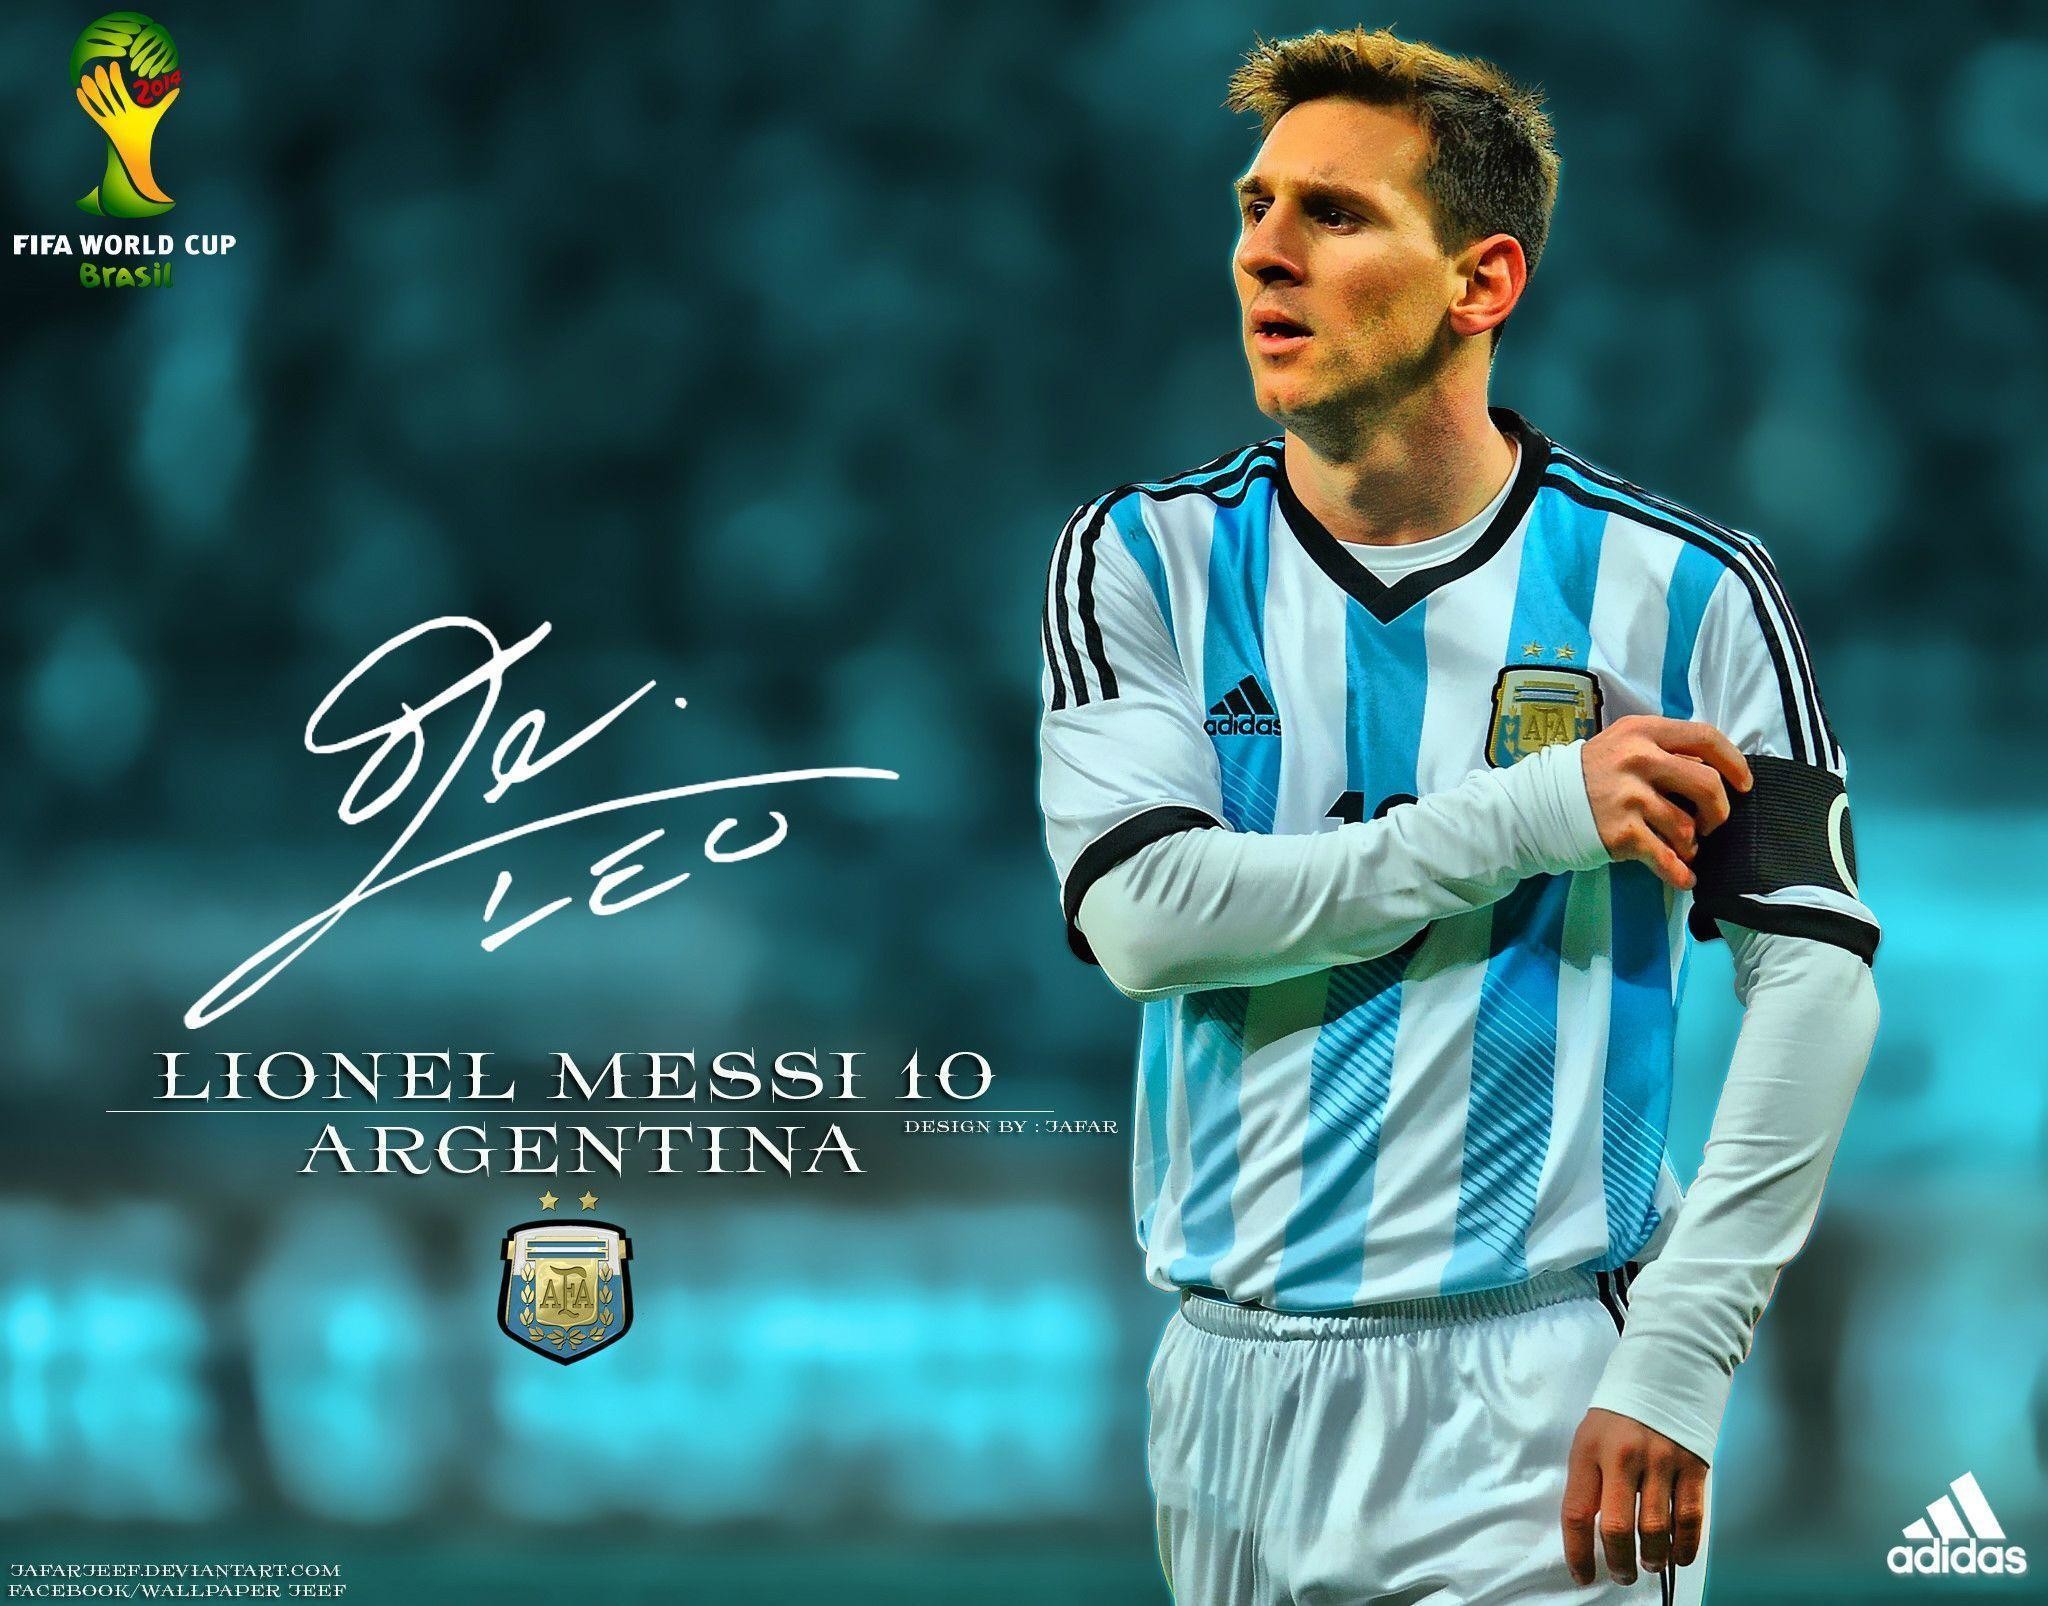 2048x1606 Lionel Messi Wallpapers HD - Wallpaper Cave